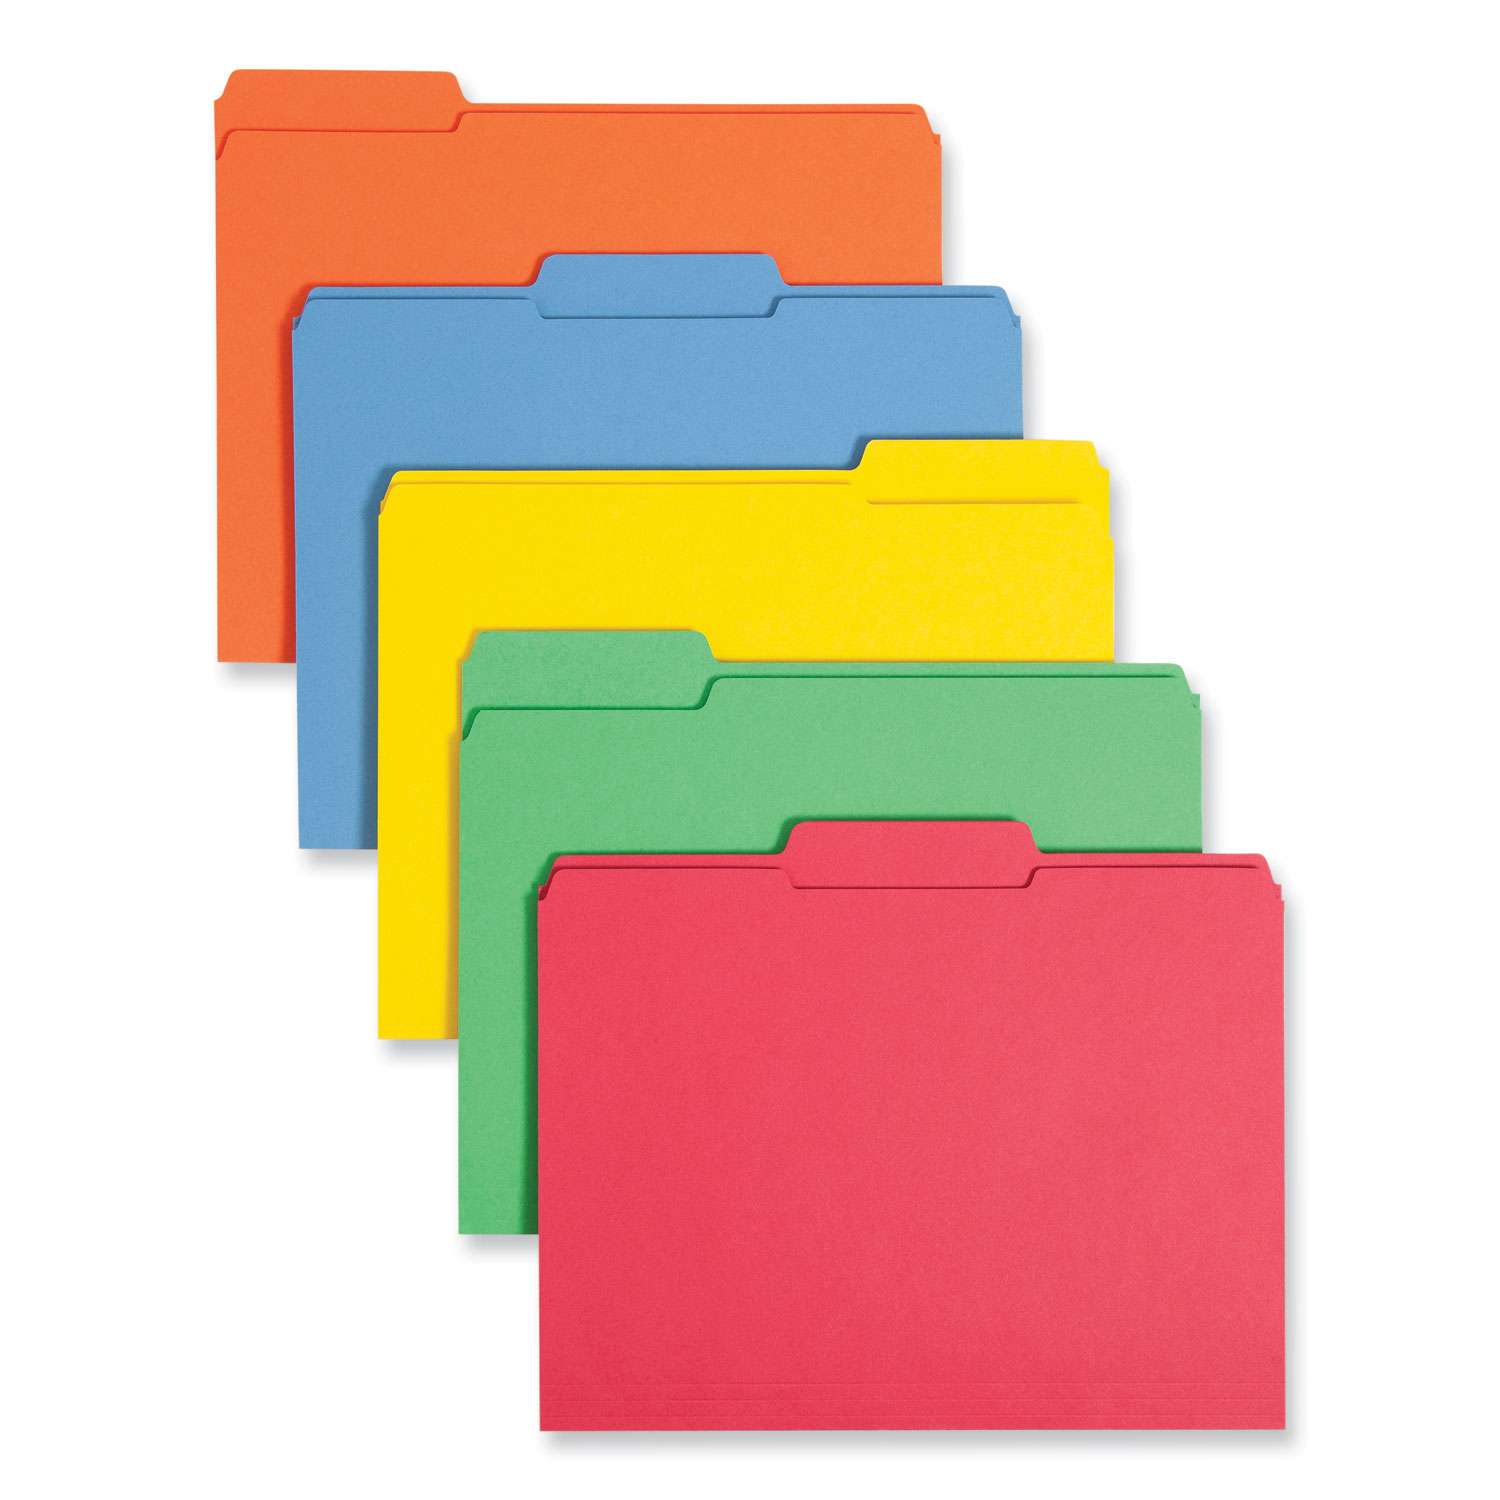 Reinforced　Colors,　Letter　Top　Western　Size,　Tab　Tabs:　Colored　File　Folders,　100/Box　1/3-Cut　Assorted,　0.75